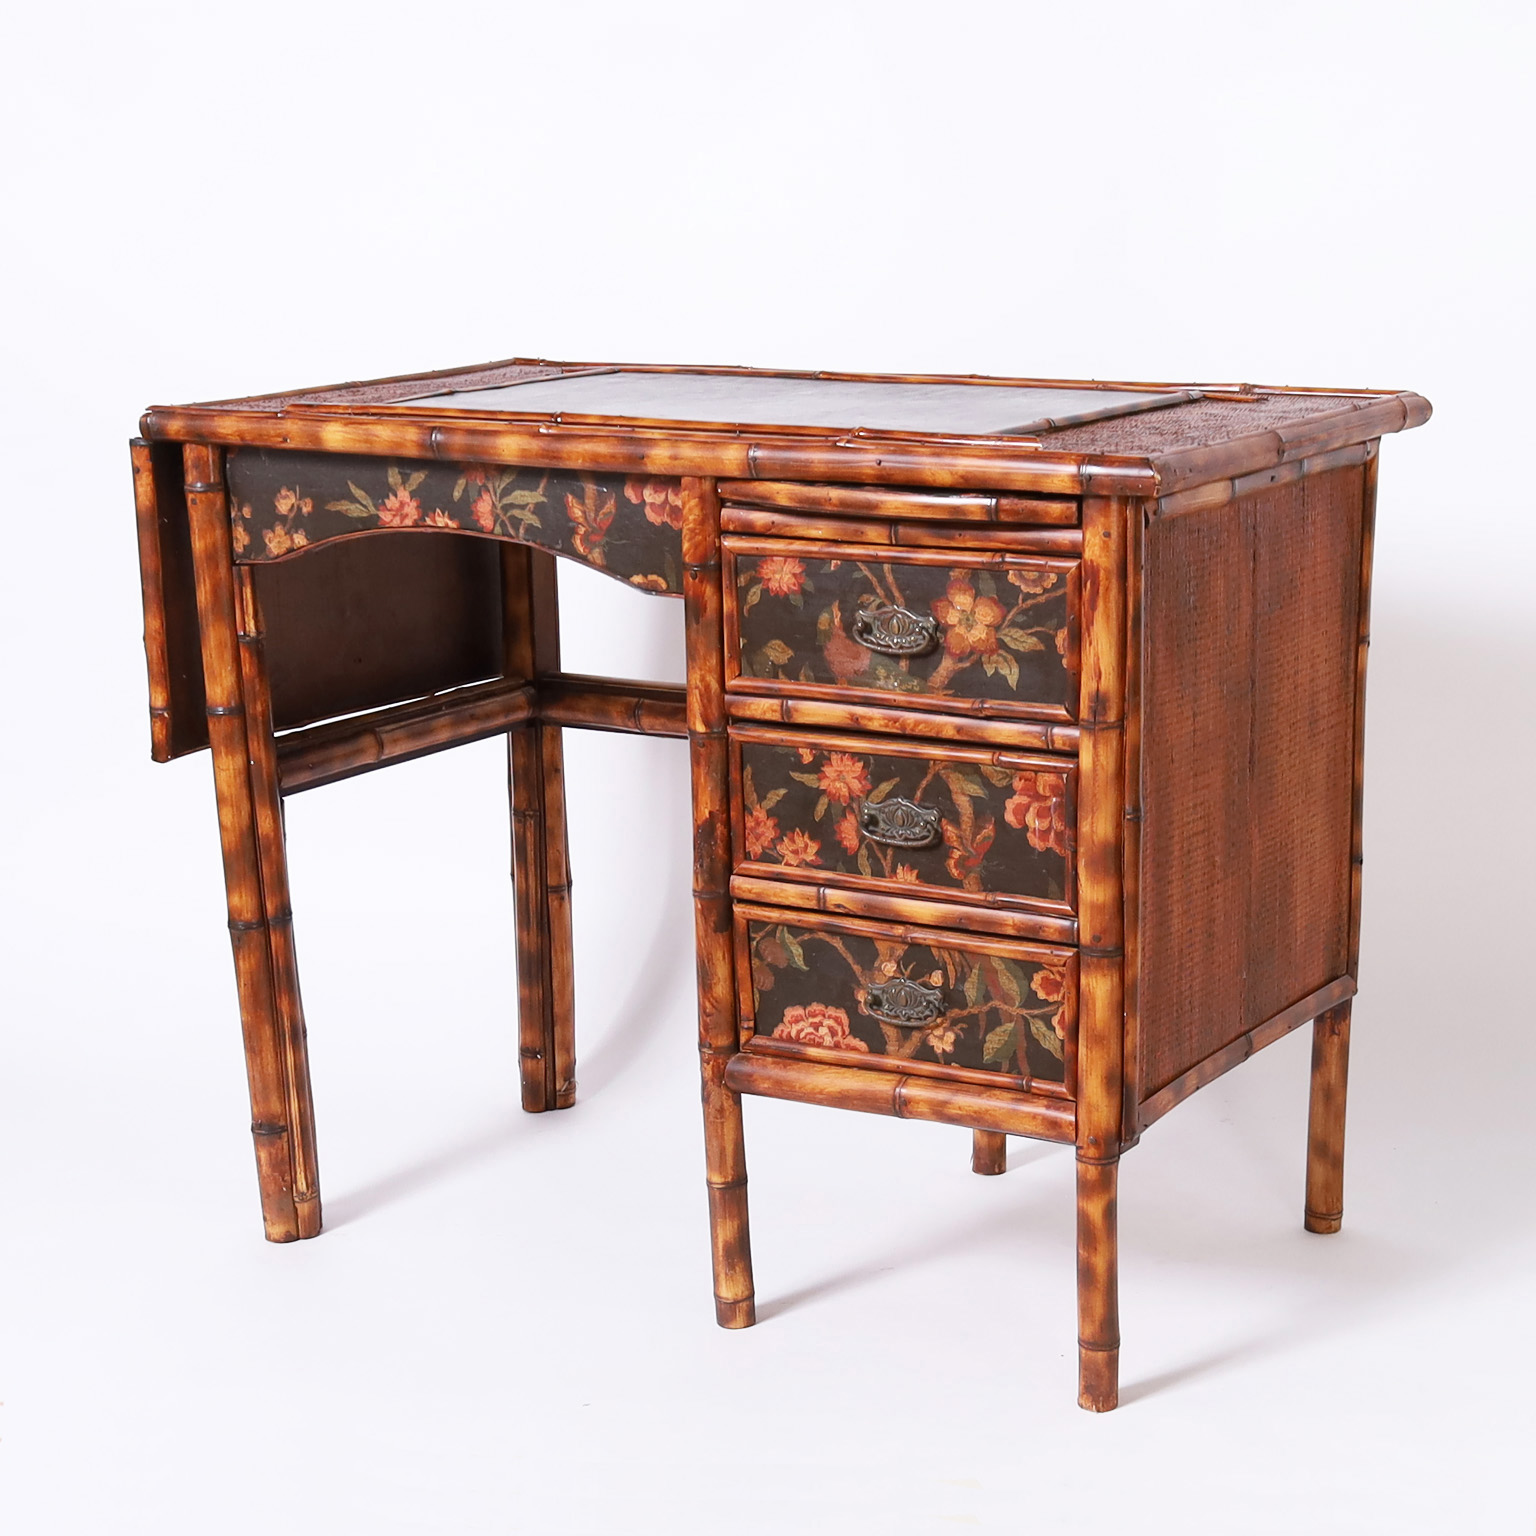 Antique English Bamboo Desk or Writing Table